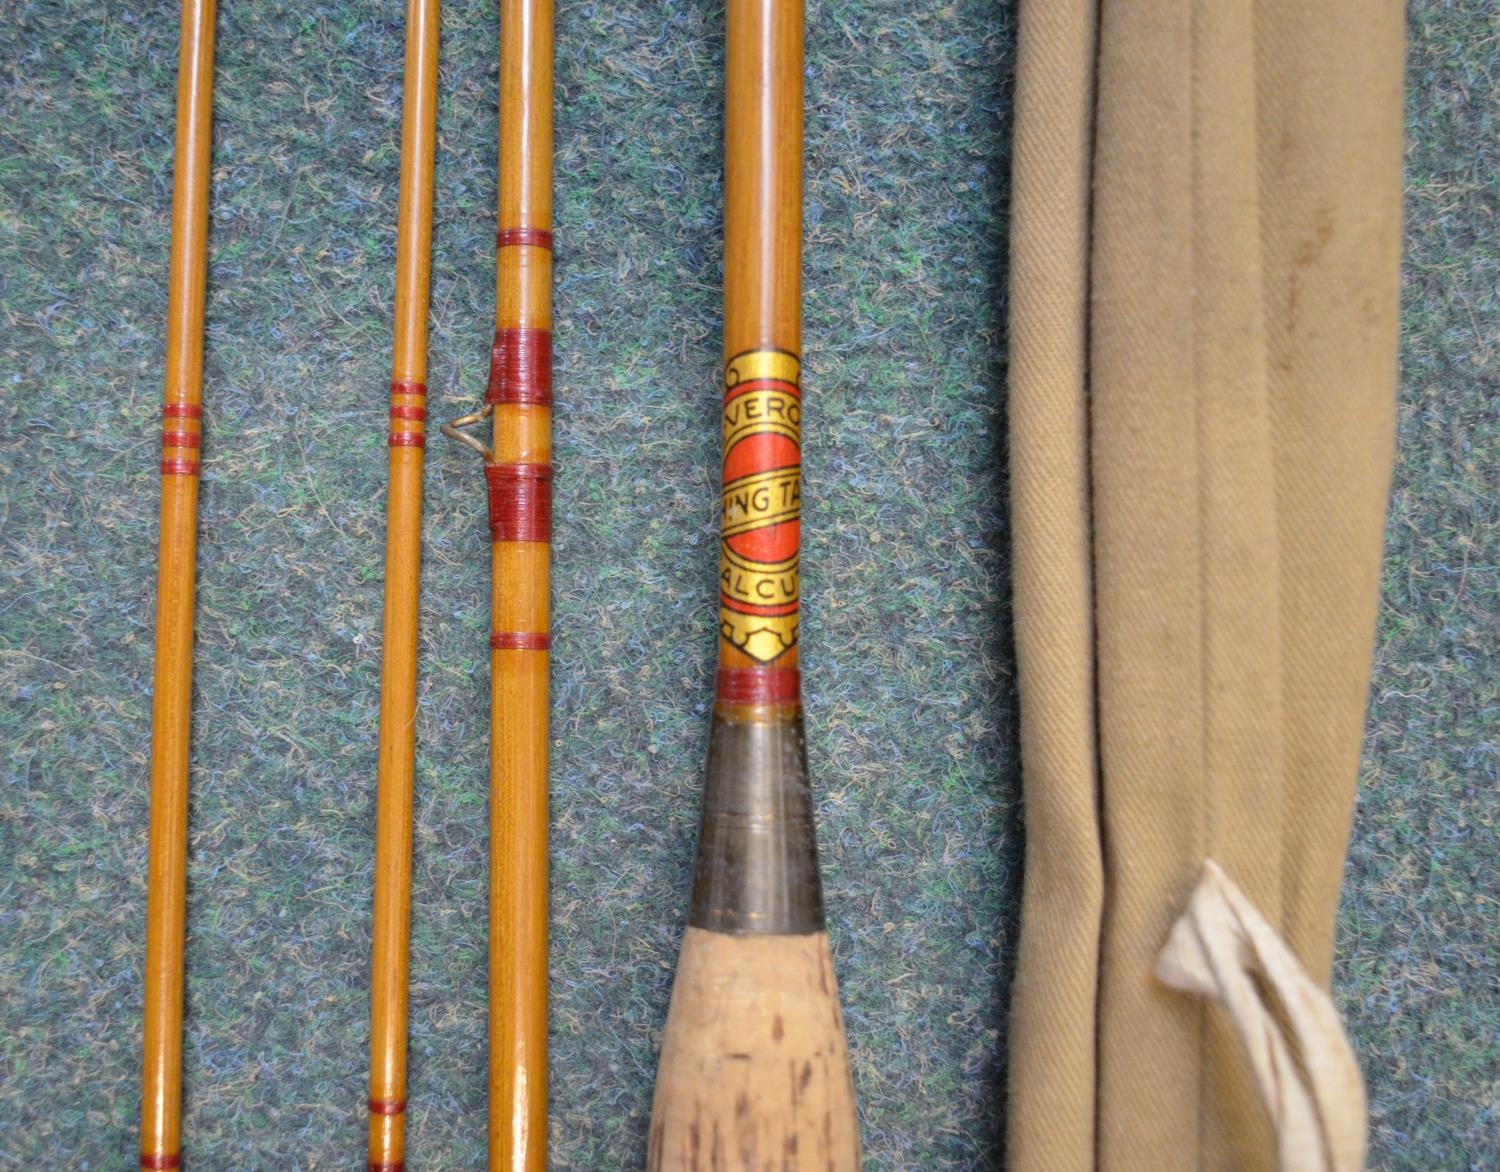 Four vintage fishing rods - unfinished solid wood turned three piece fishing rod L310cm (A/F), - Image 7 of 11